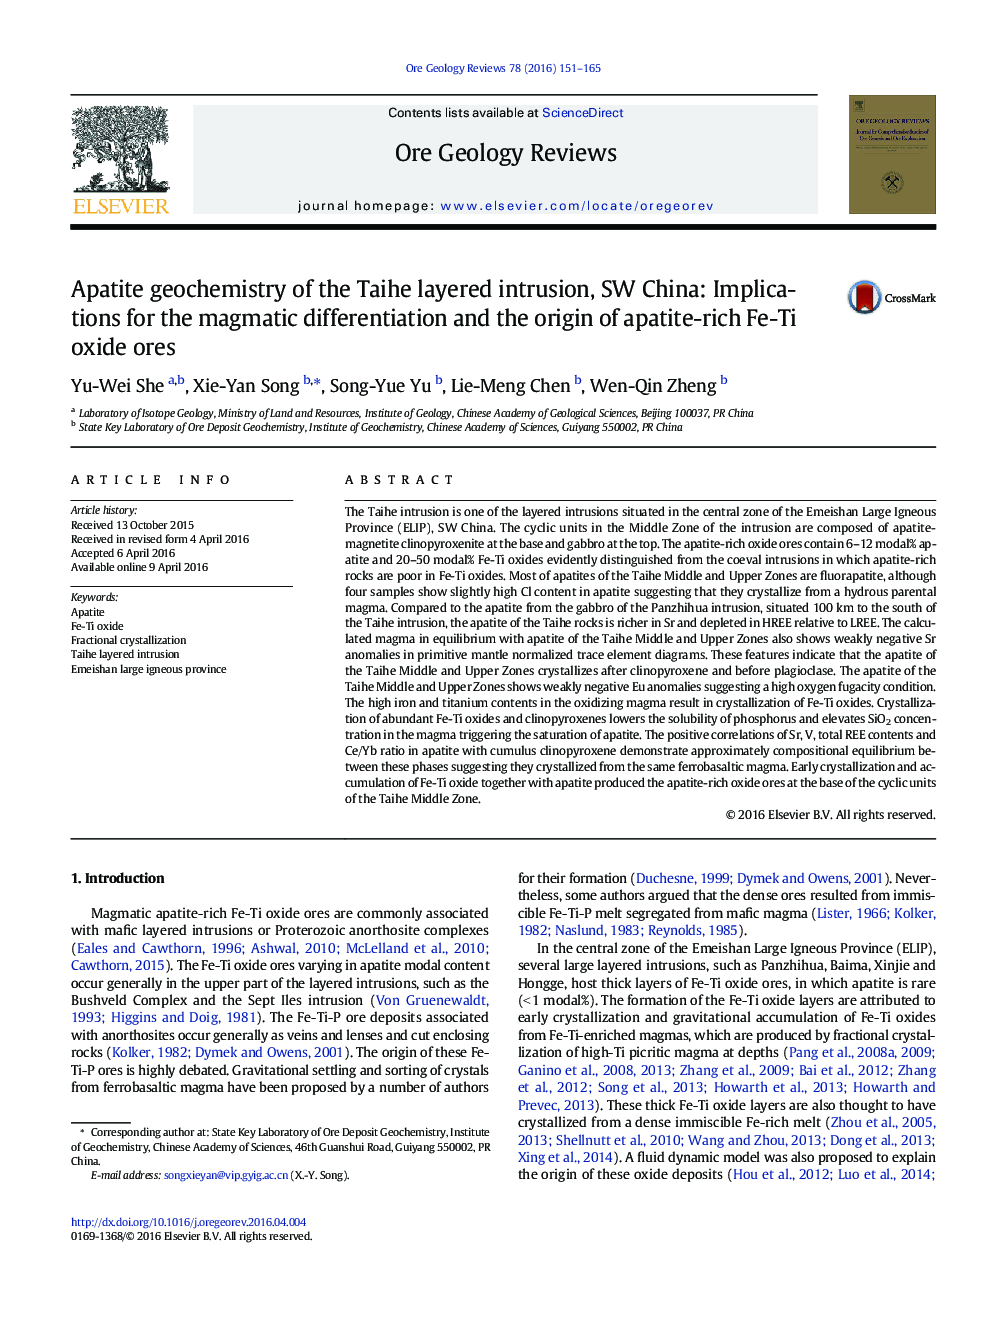 Apatite geochemistry of the Taihe layered intrusion, SW China: Implications for the magmatic differentiation and the origin of apatite-rich Fe-Ti oxide ores